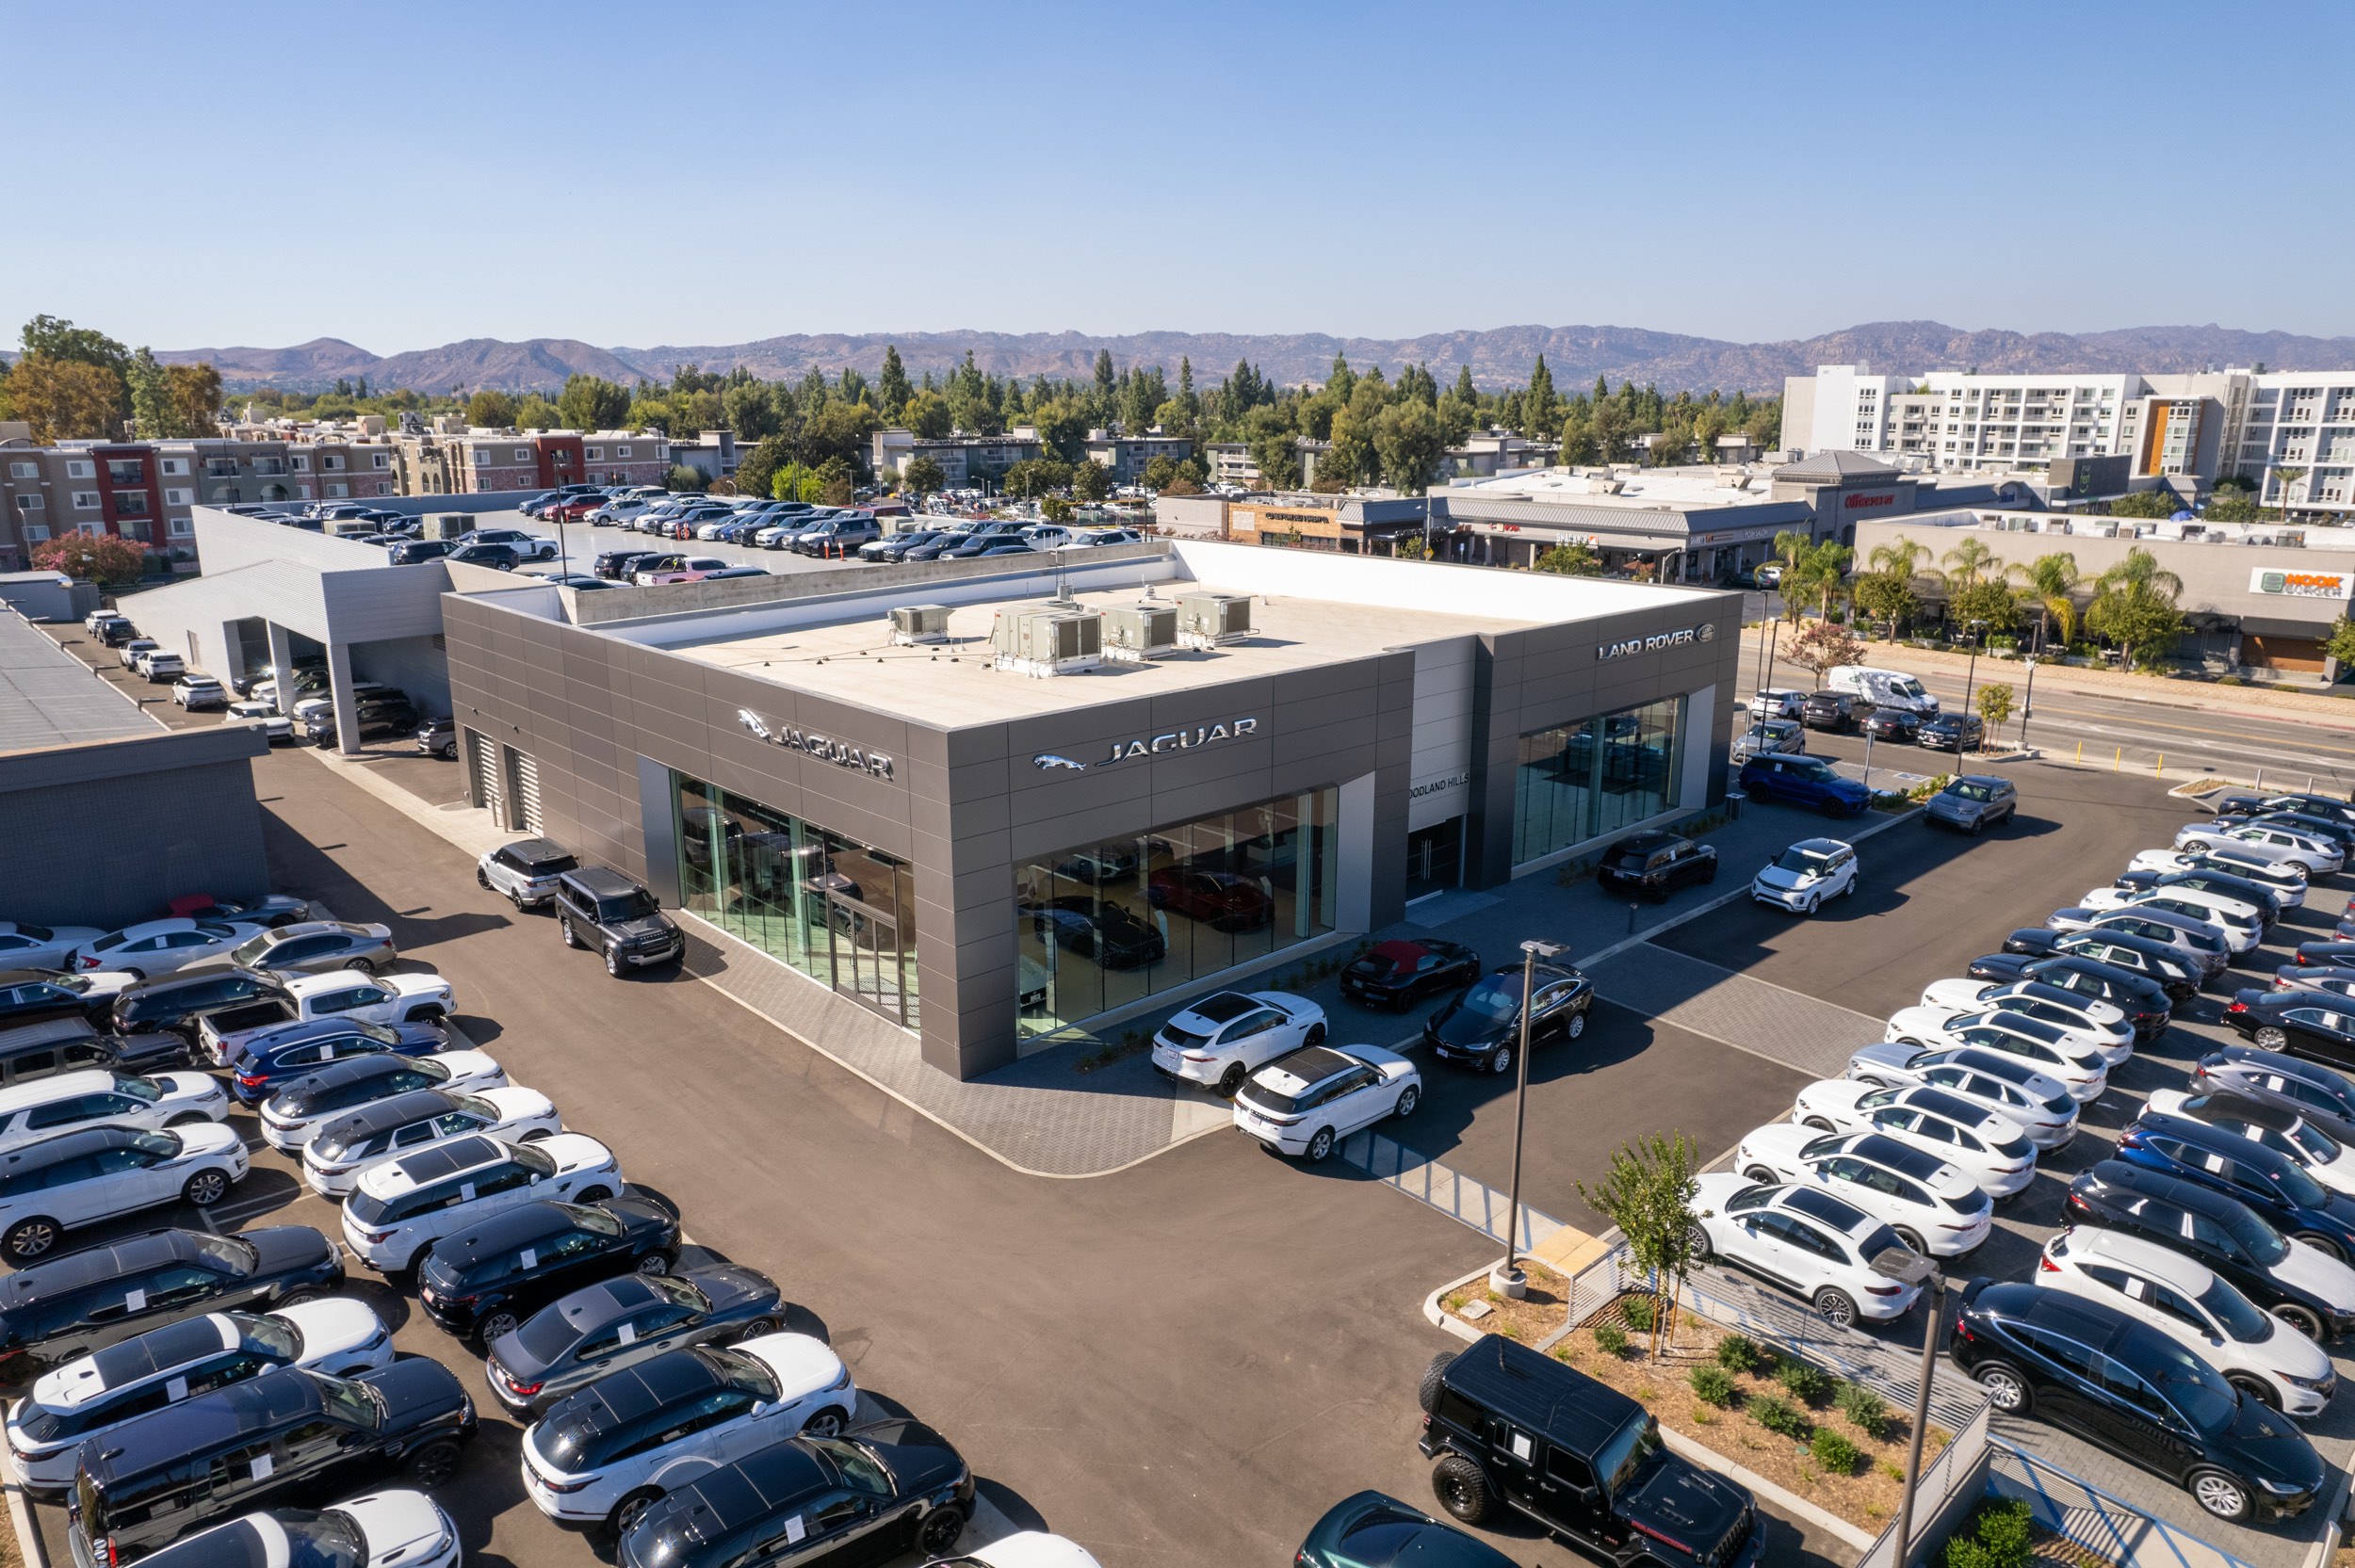 Aerial view of Jaguar Woodland Hills car dealership surrounded by vehicles in the parking lot. Evergreen trees and are in the background, with mountains further in the background.